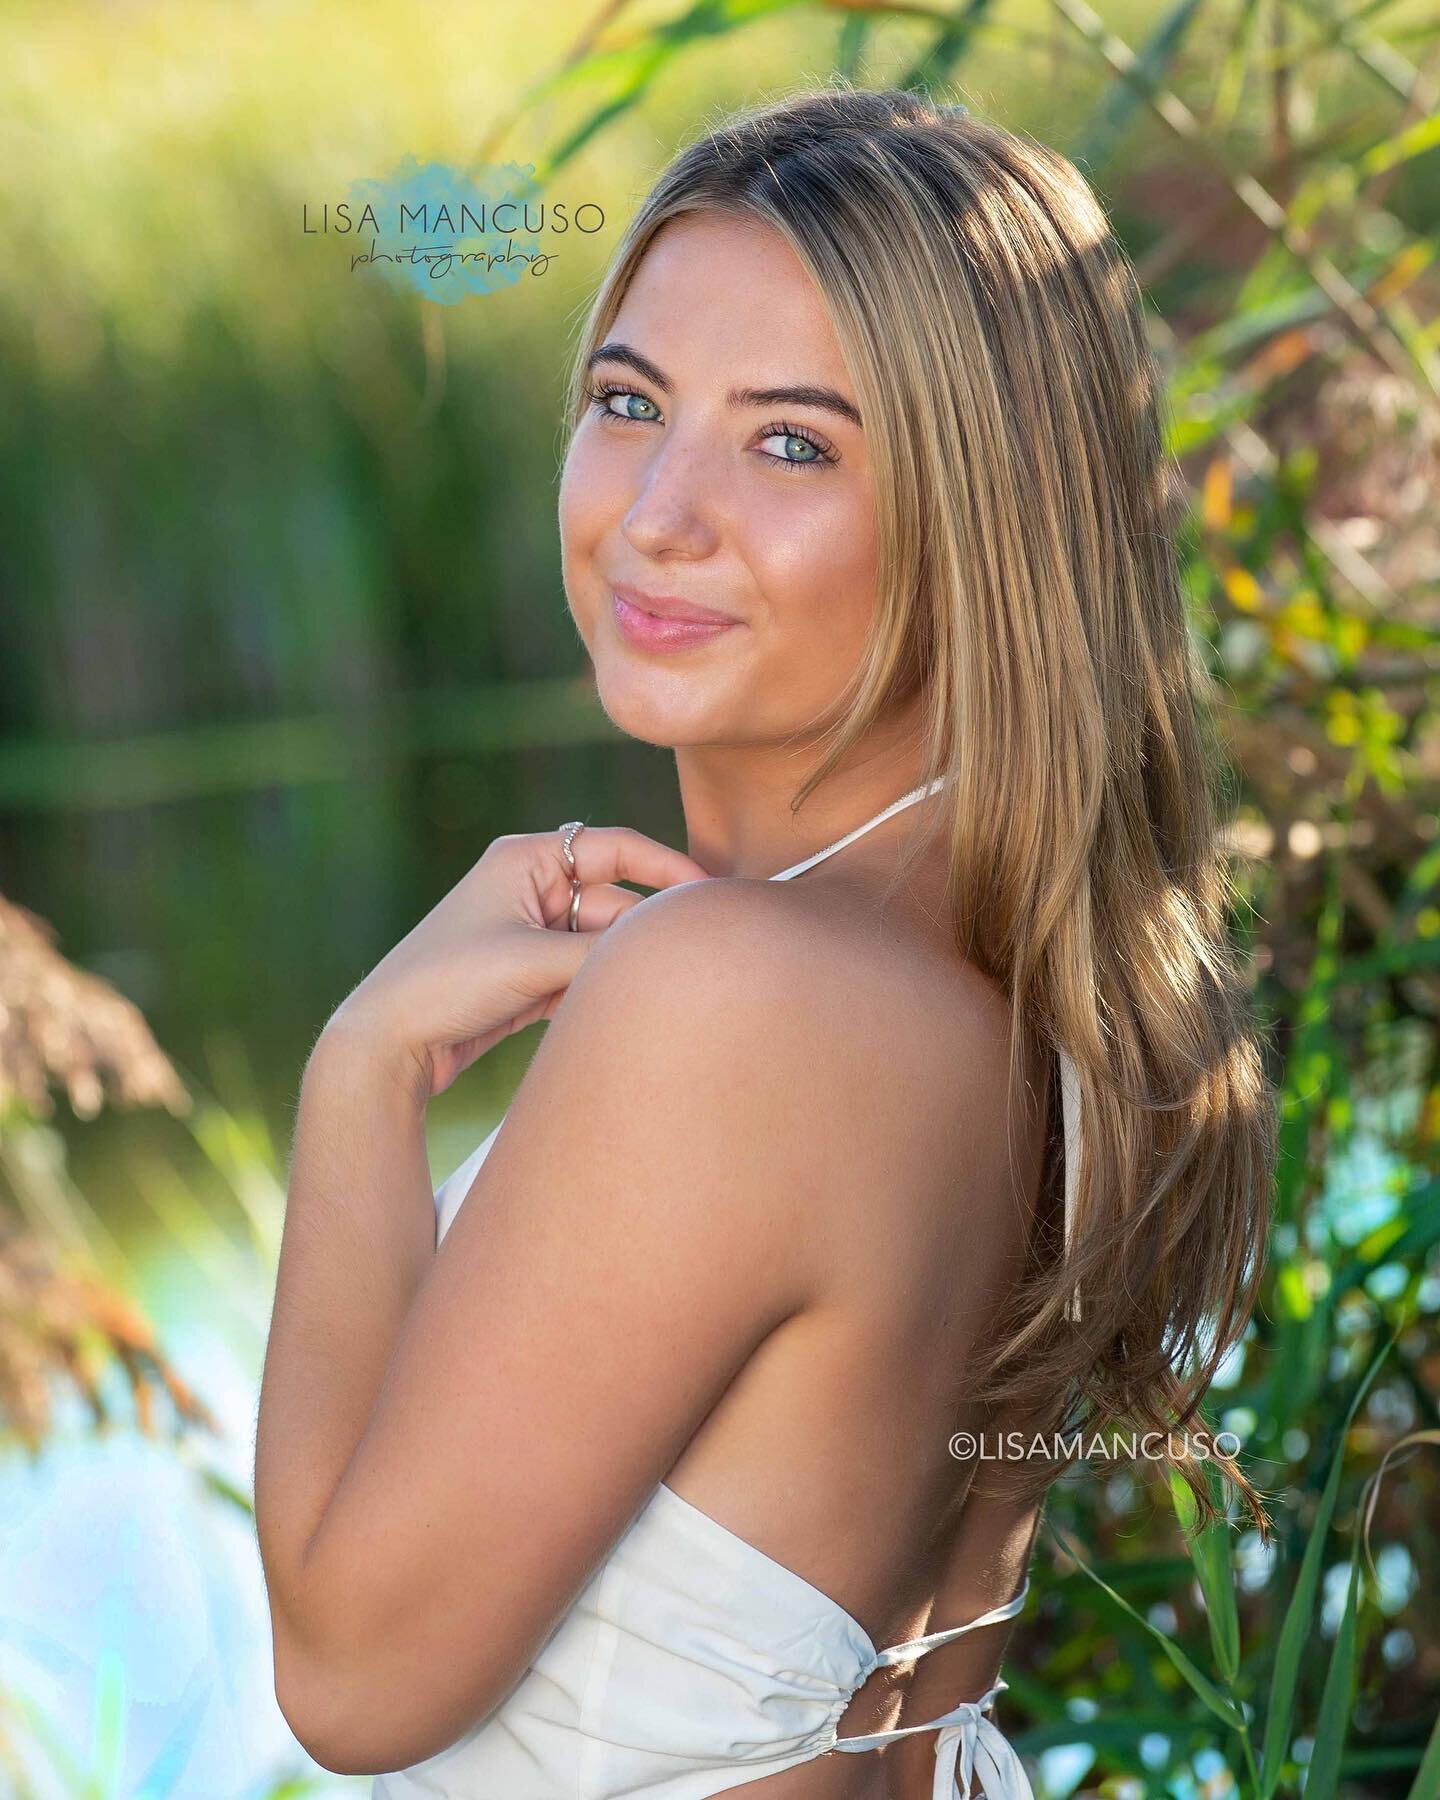 Jenna, you&rsquo;re gorgeous inside and out! What a pleasure it was working with you! Great job! I am posting the others to your personal gallery now!  #lisamancusophotographyseniors #outdoorseniorphotography #maseniorphotographer #northshoreseniorph